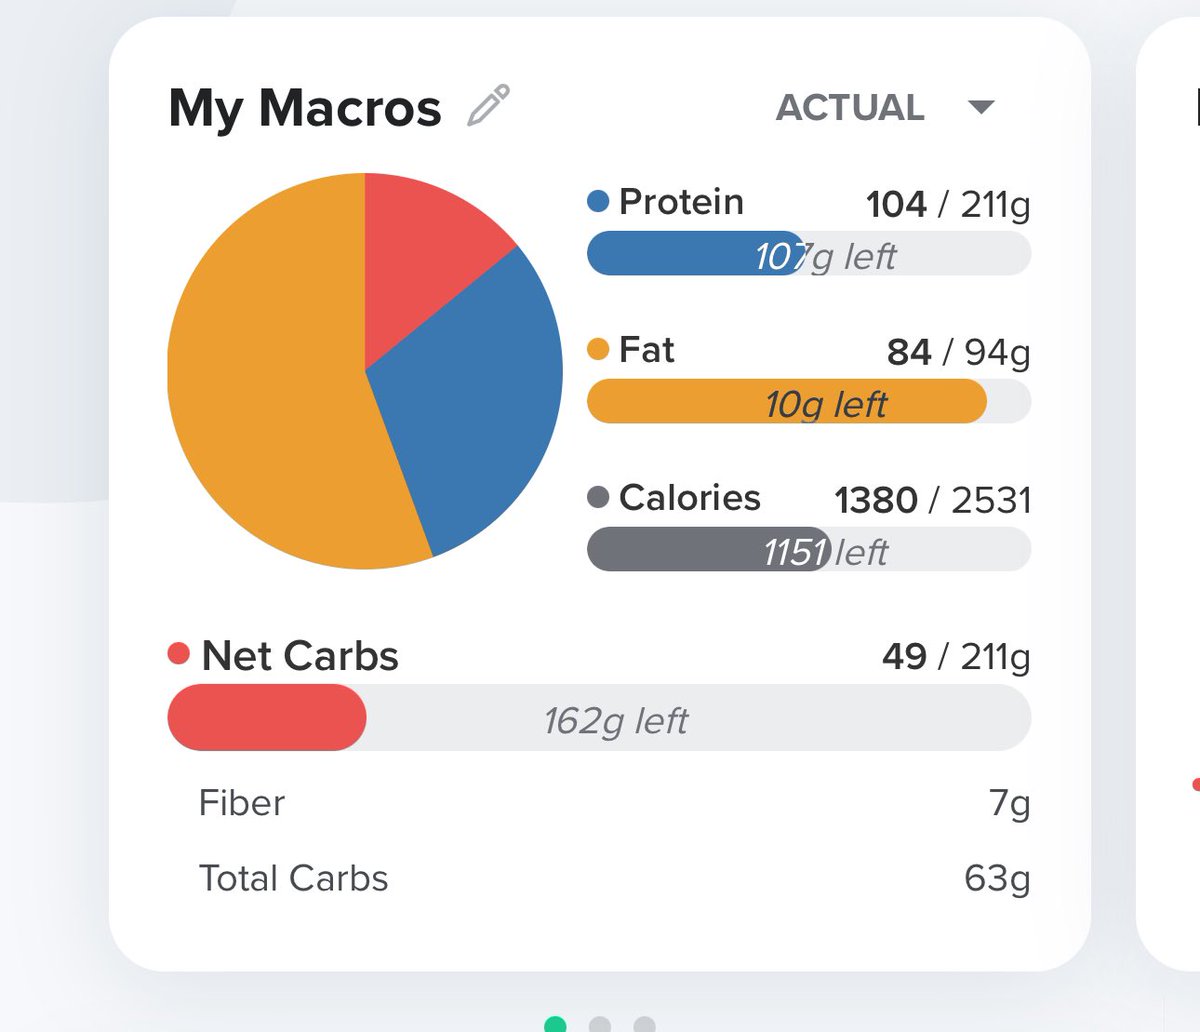 Recently started tracking my macros

Scary how much fat I eat daily relative to everything else my body needs

This is your call to begin macro tracking & get your health together!

Anybody with tips I’m always open to health advice 🔥